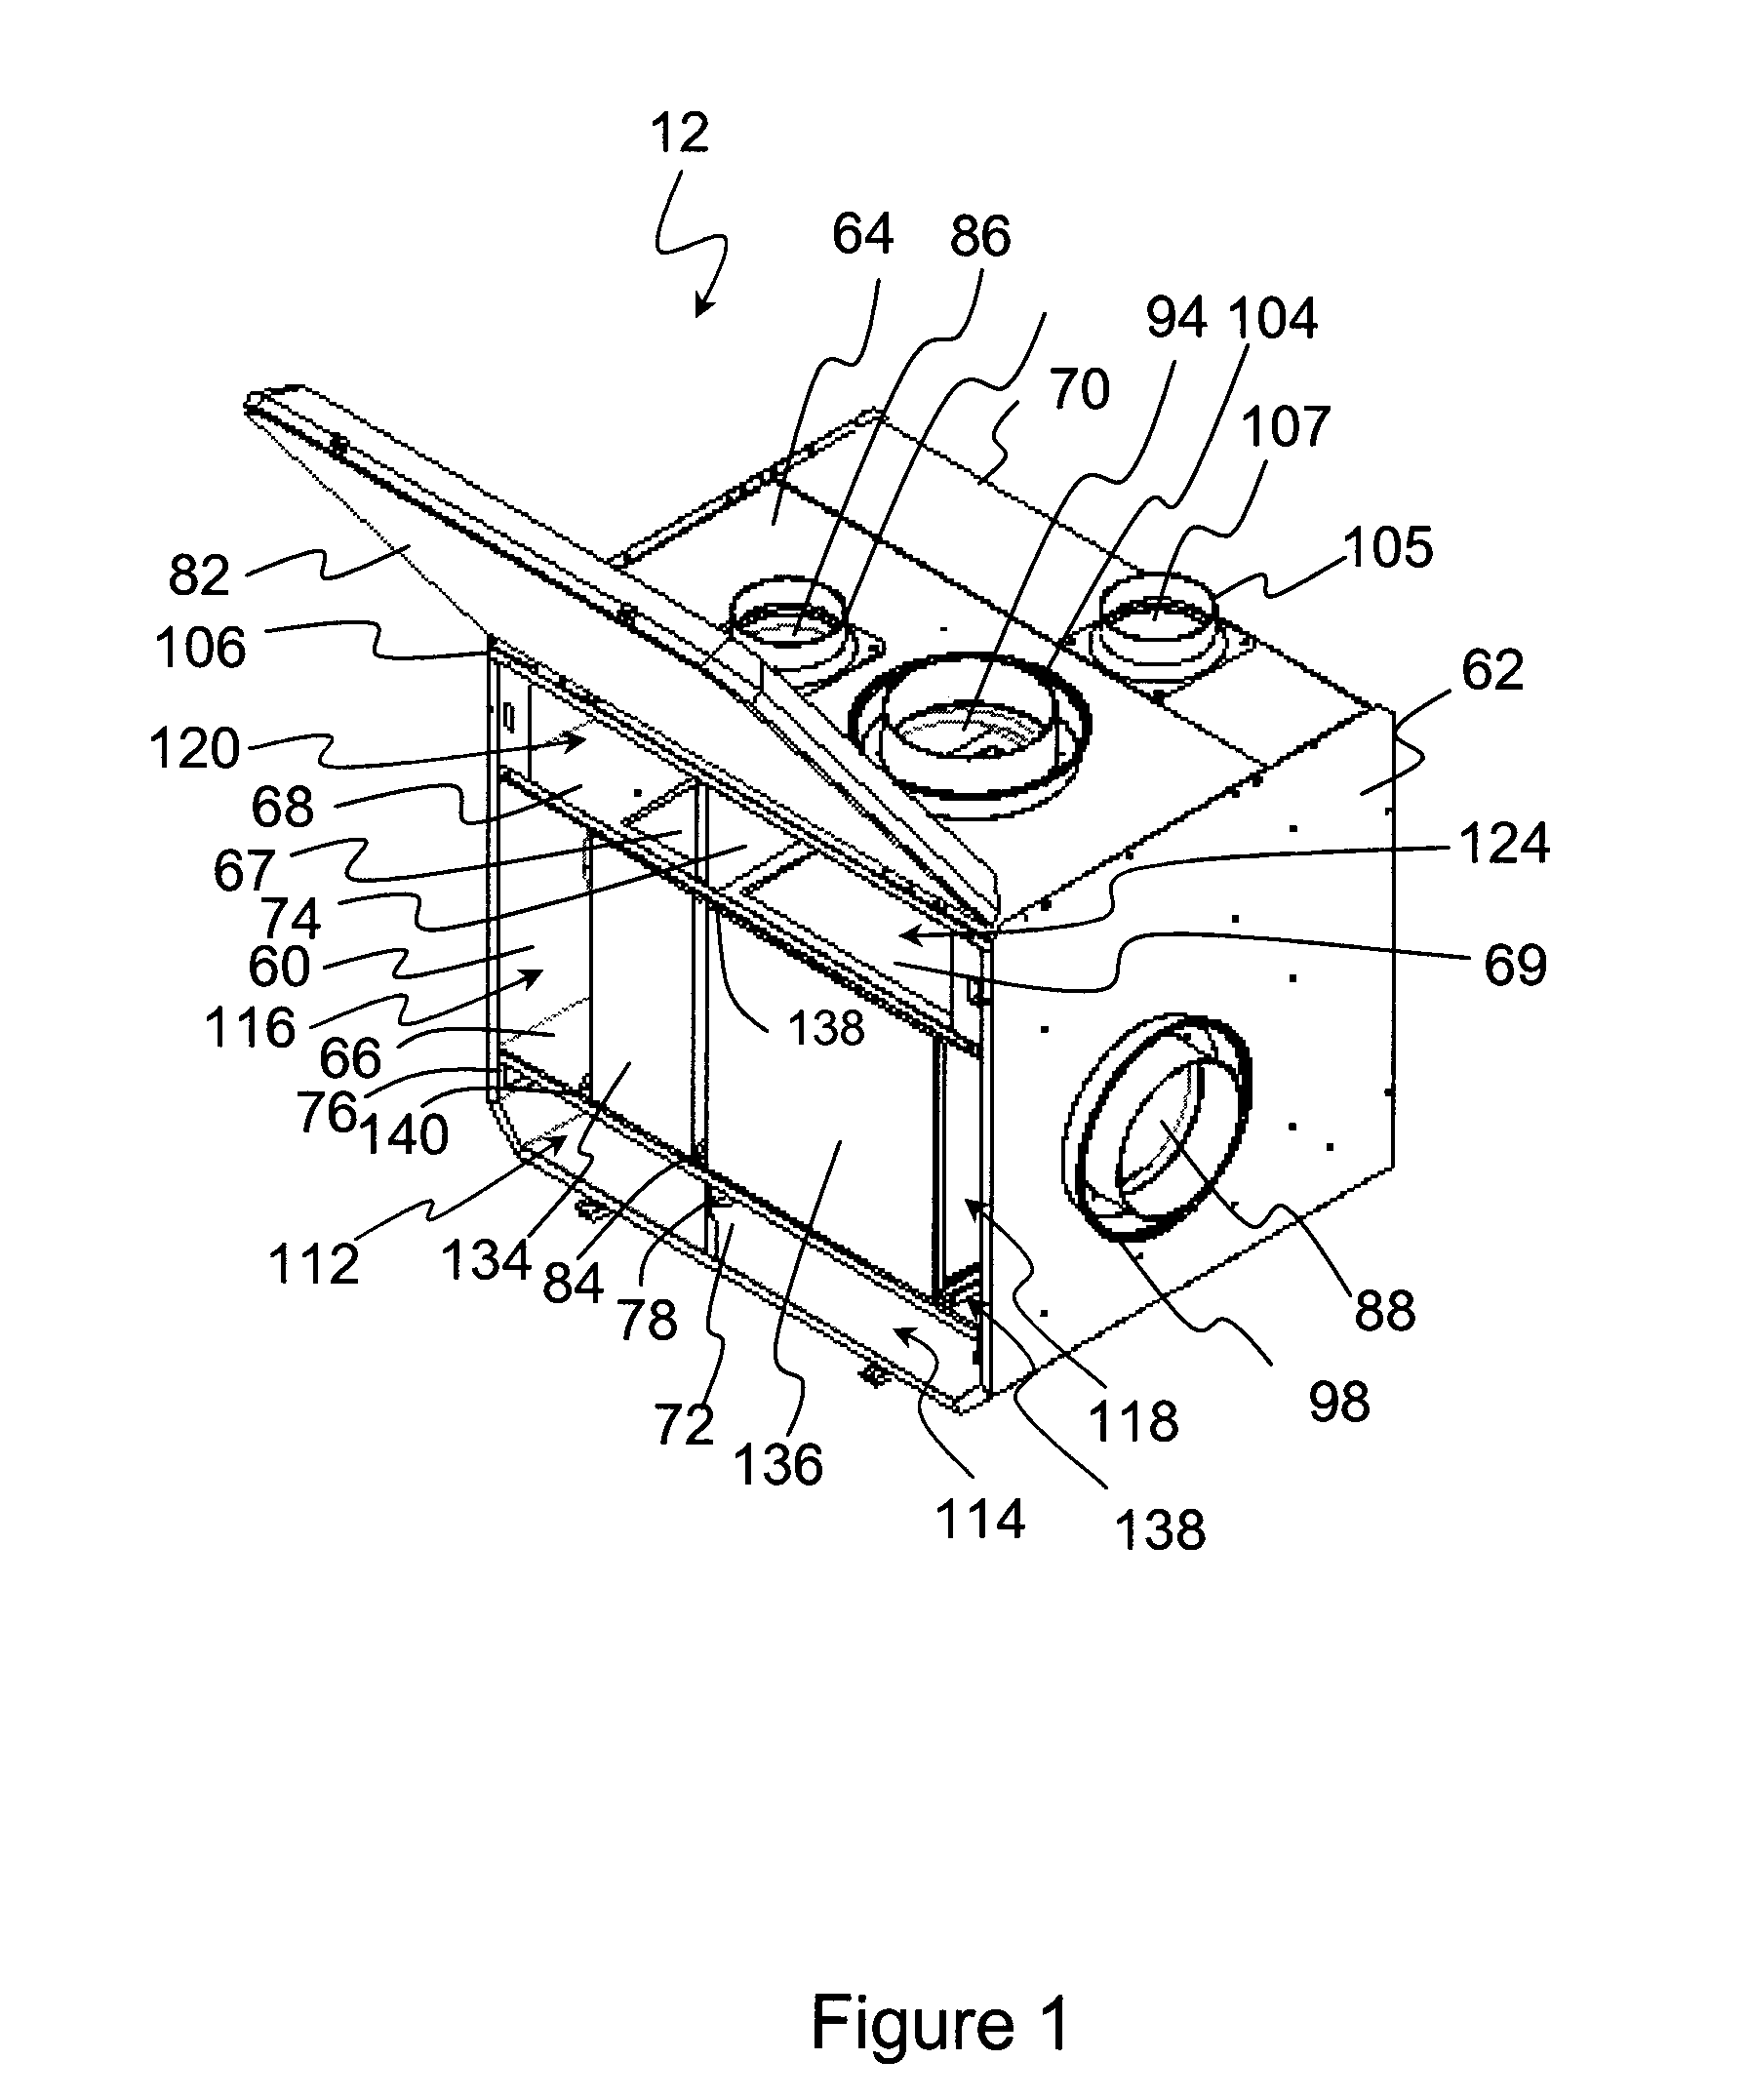 Heat or energy recovery housing and sealing system